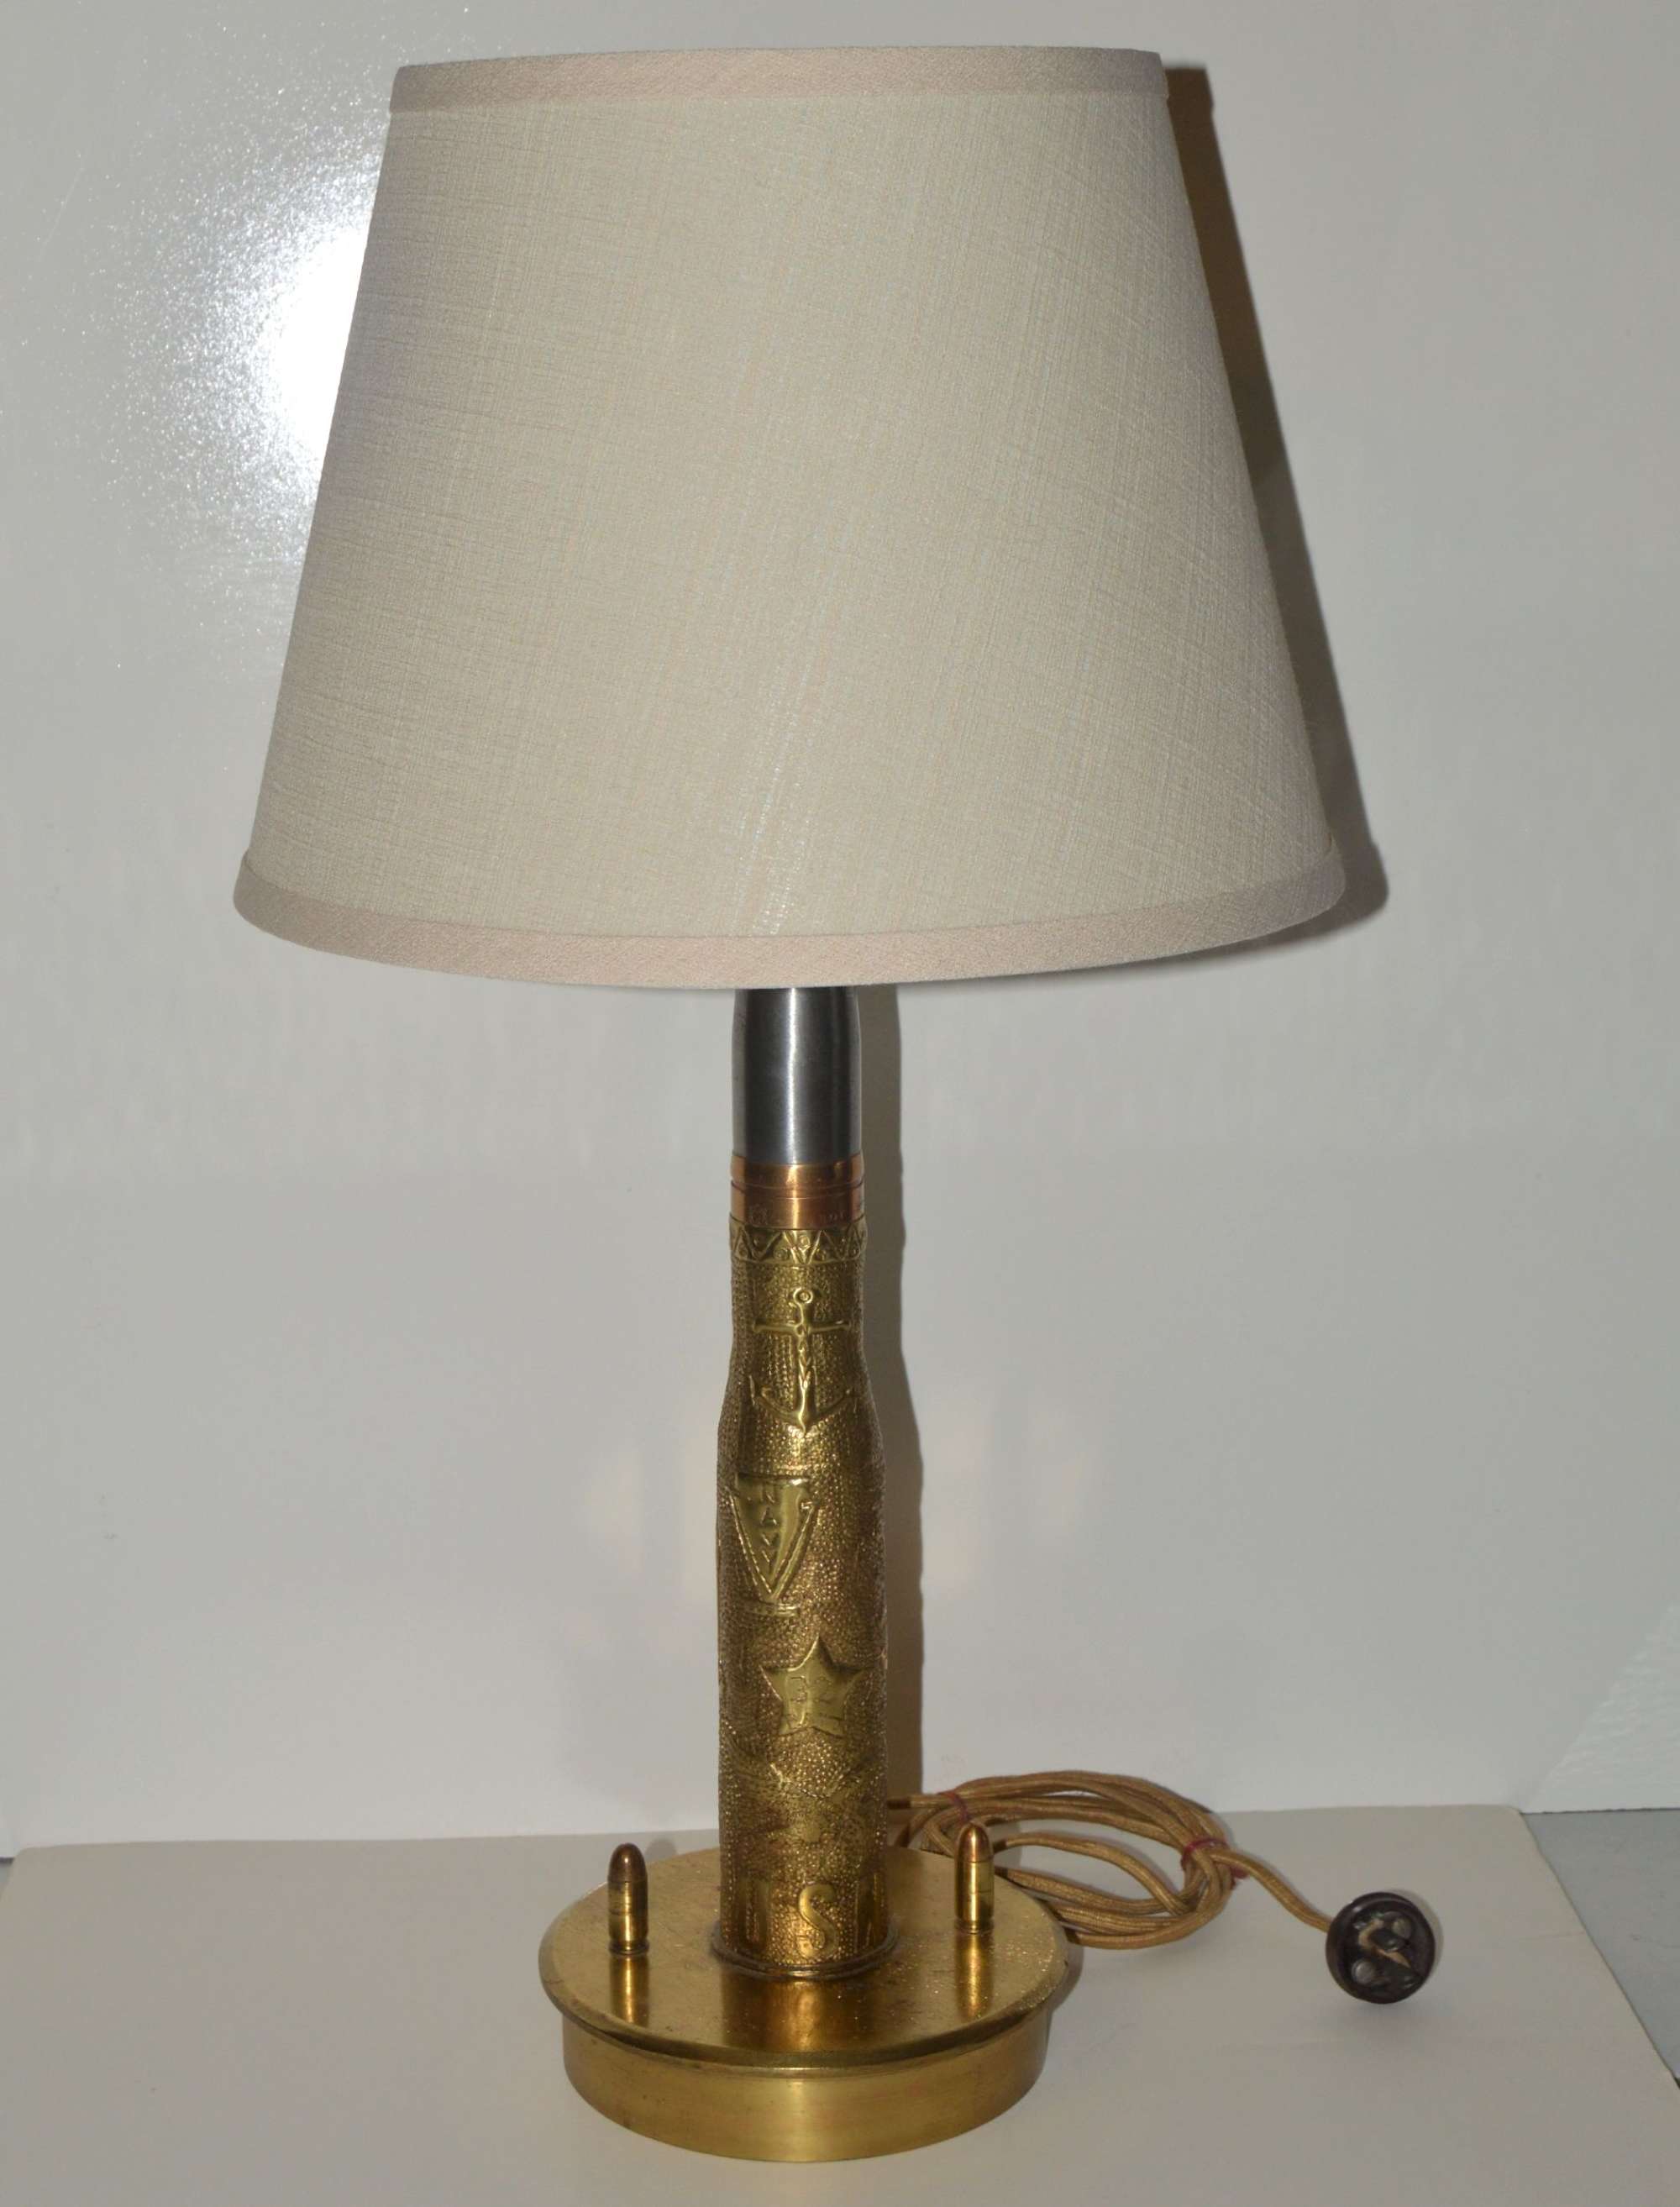 ﻿Signed and Dated WWII US Navy Trench Art Lamp